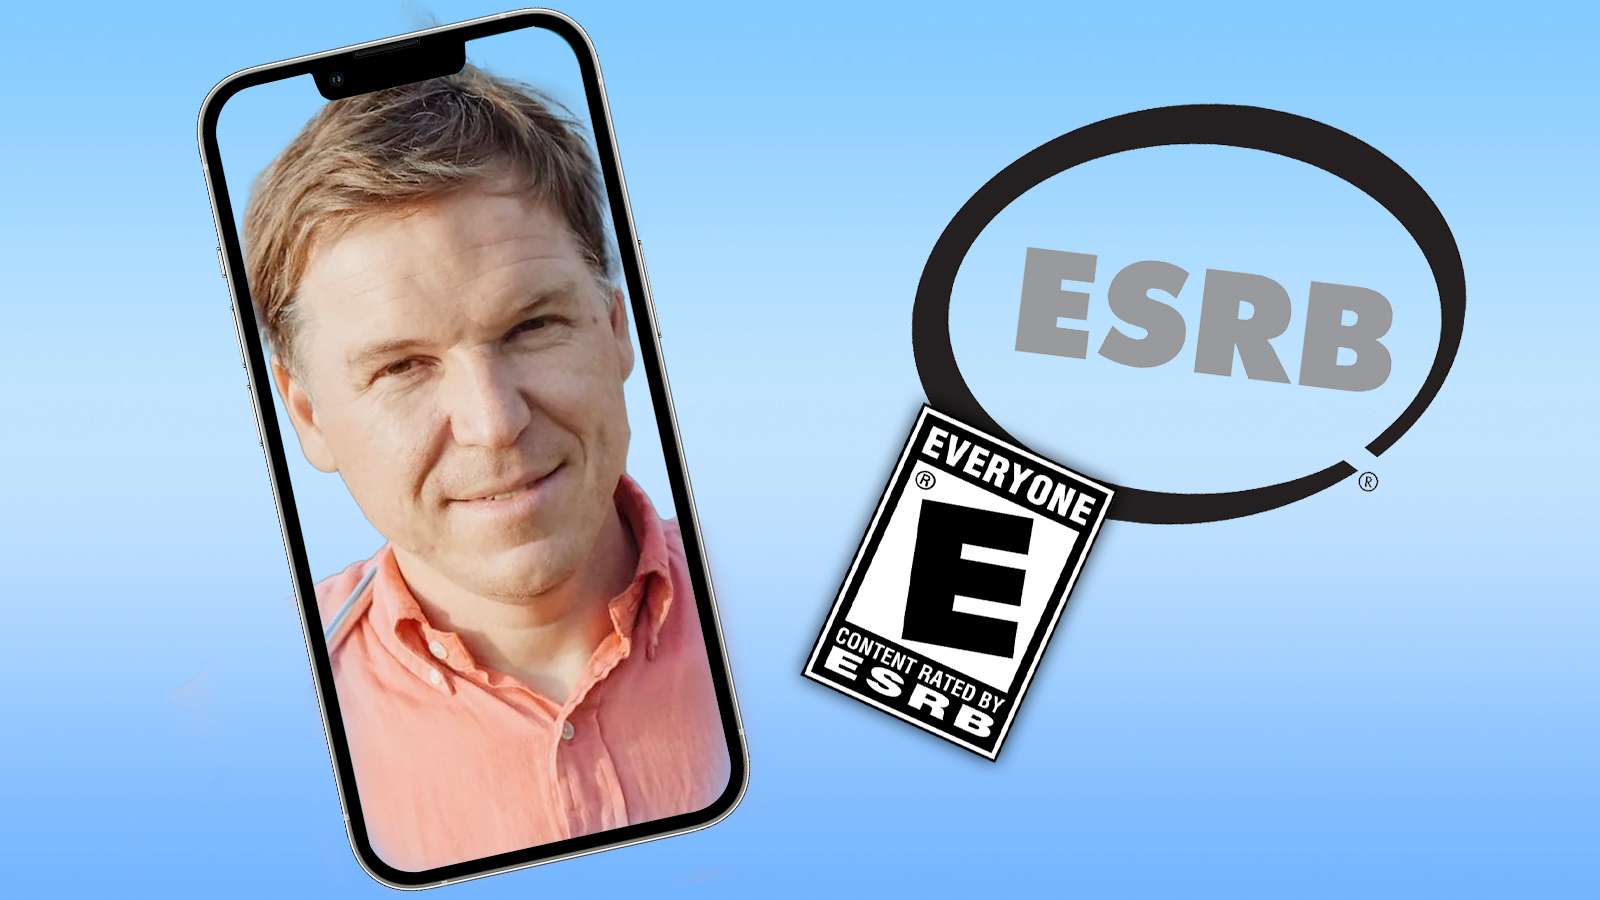 ESRB logo, with rating and a dad in a phone